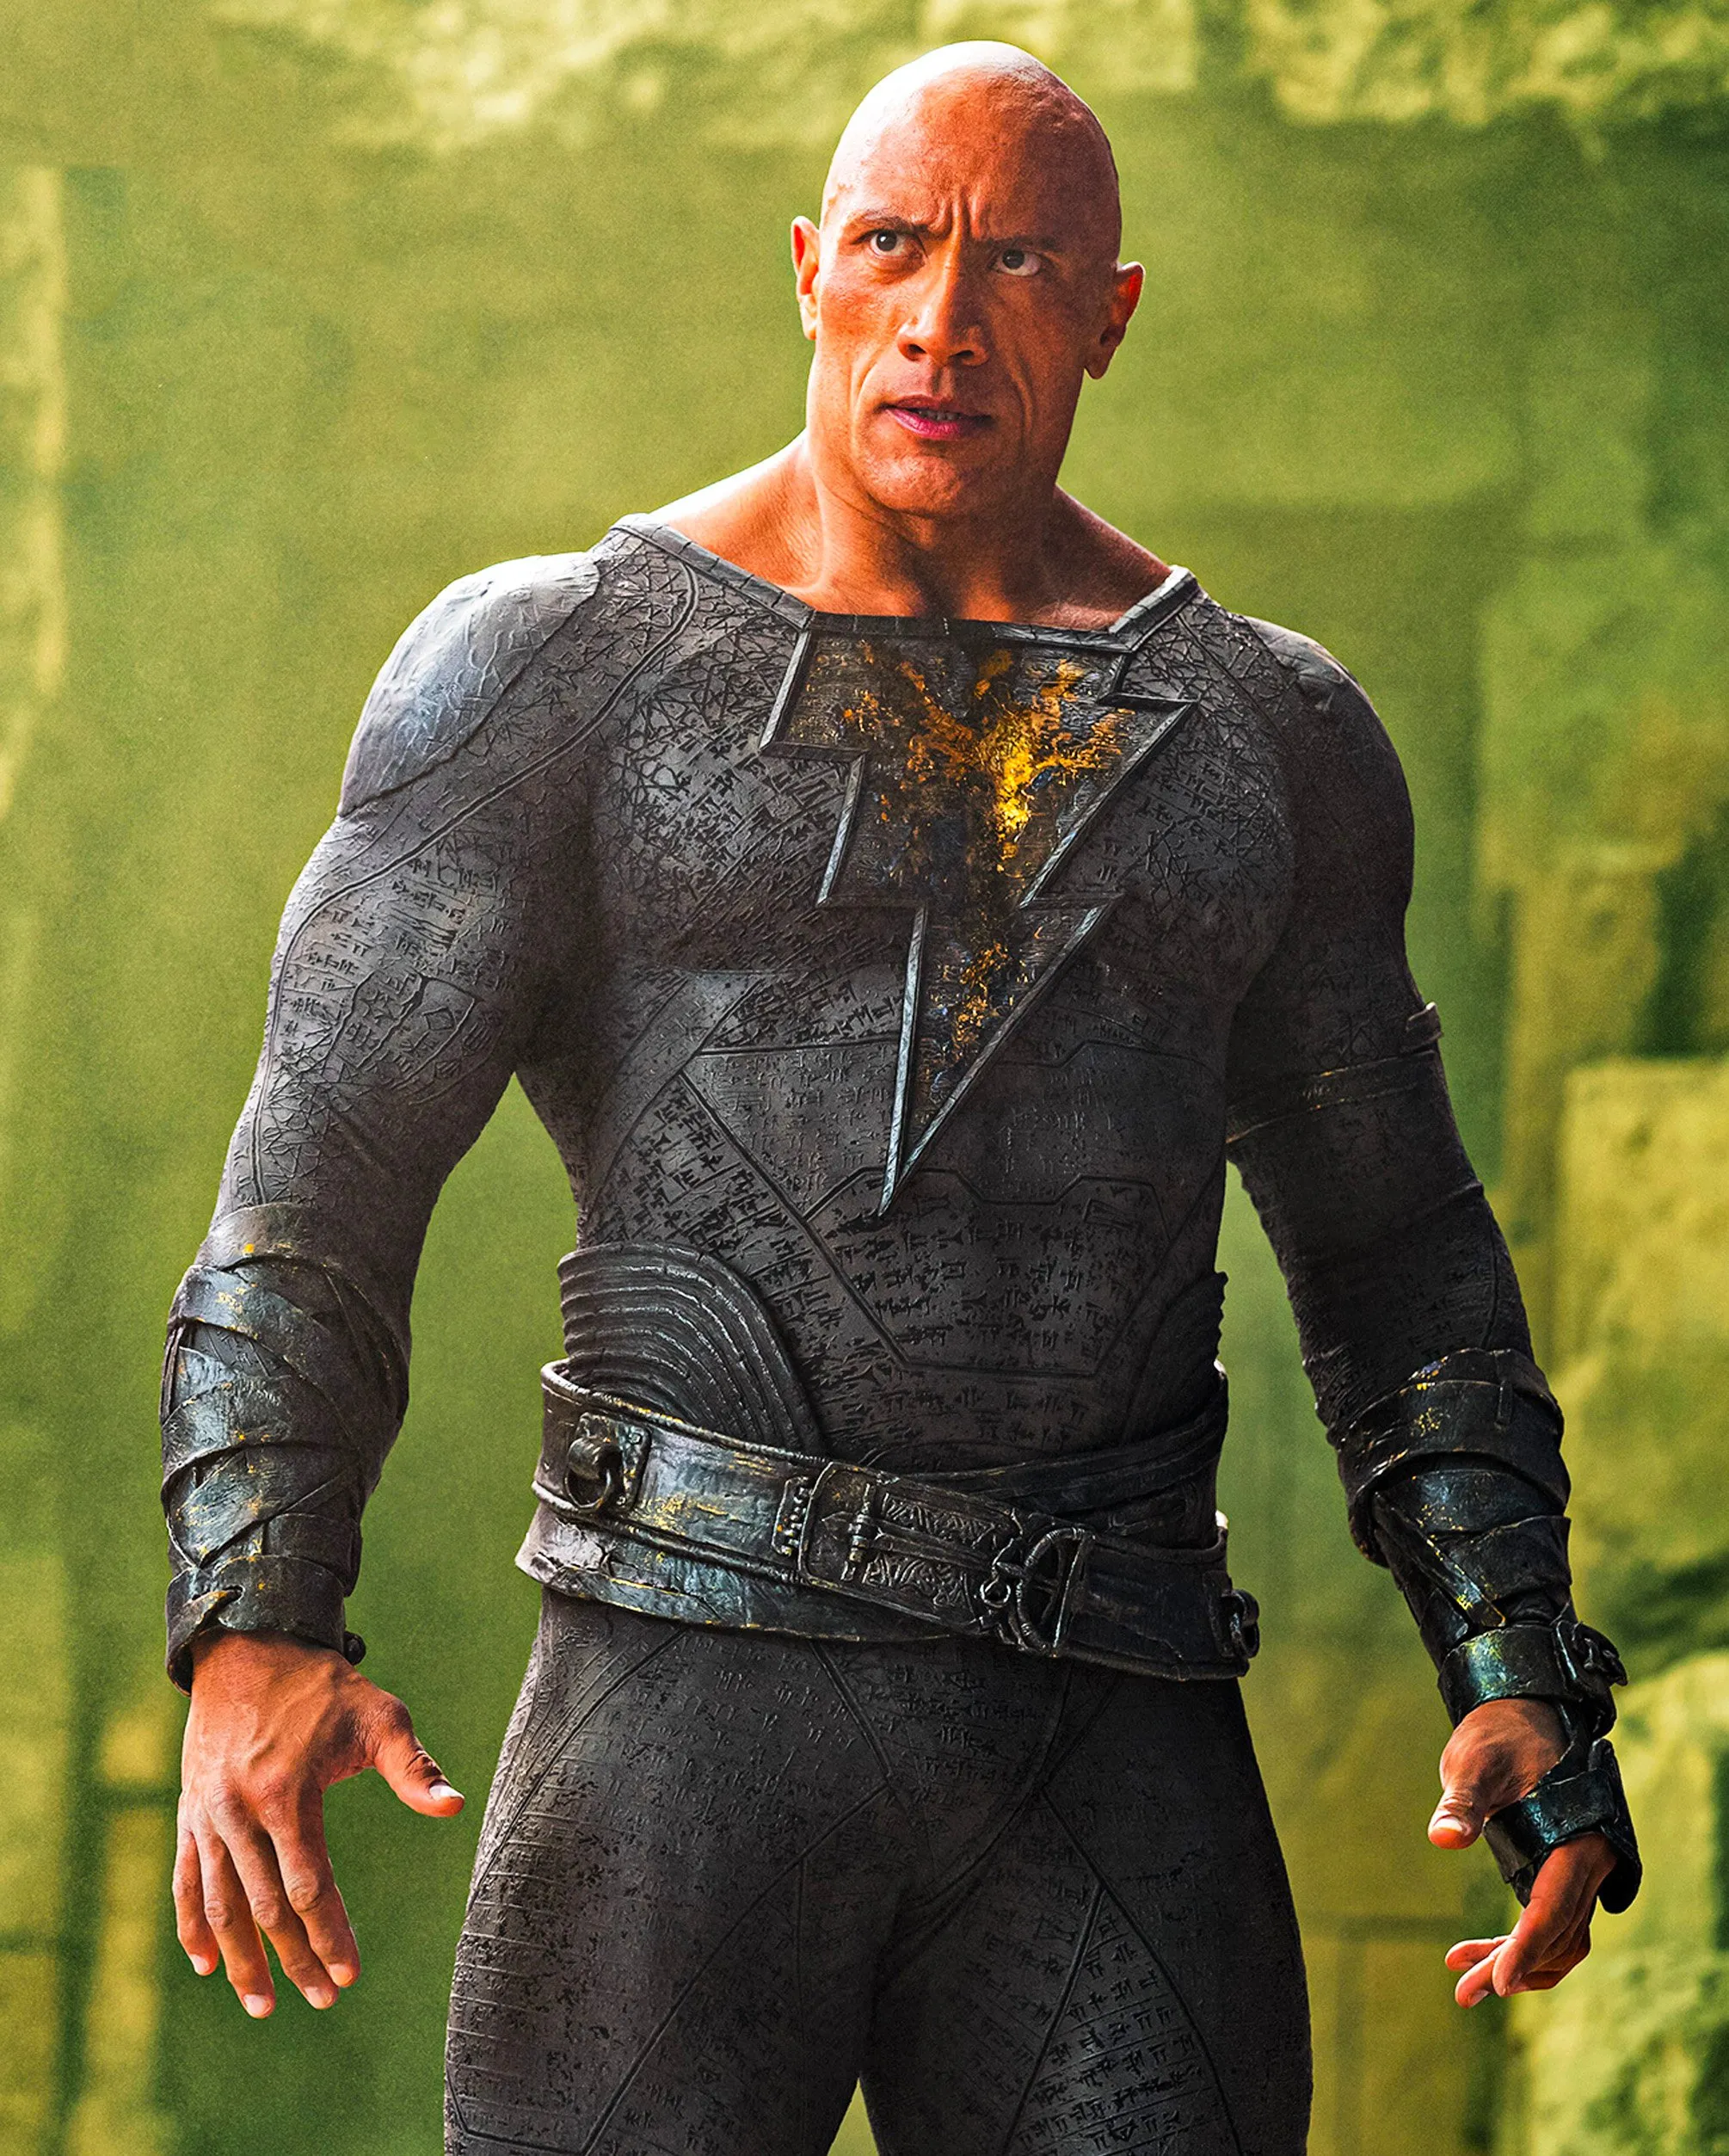 What about the DC superhero movie 'Black Adam' ? Rotten Tomatoes is 53% fresh | FMV6